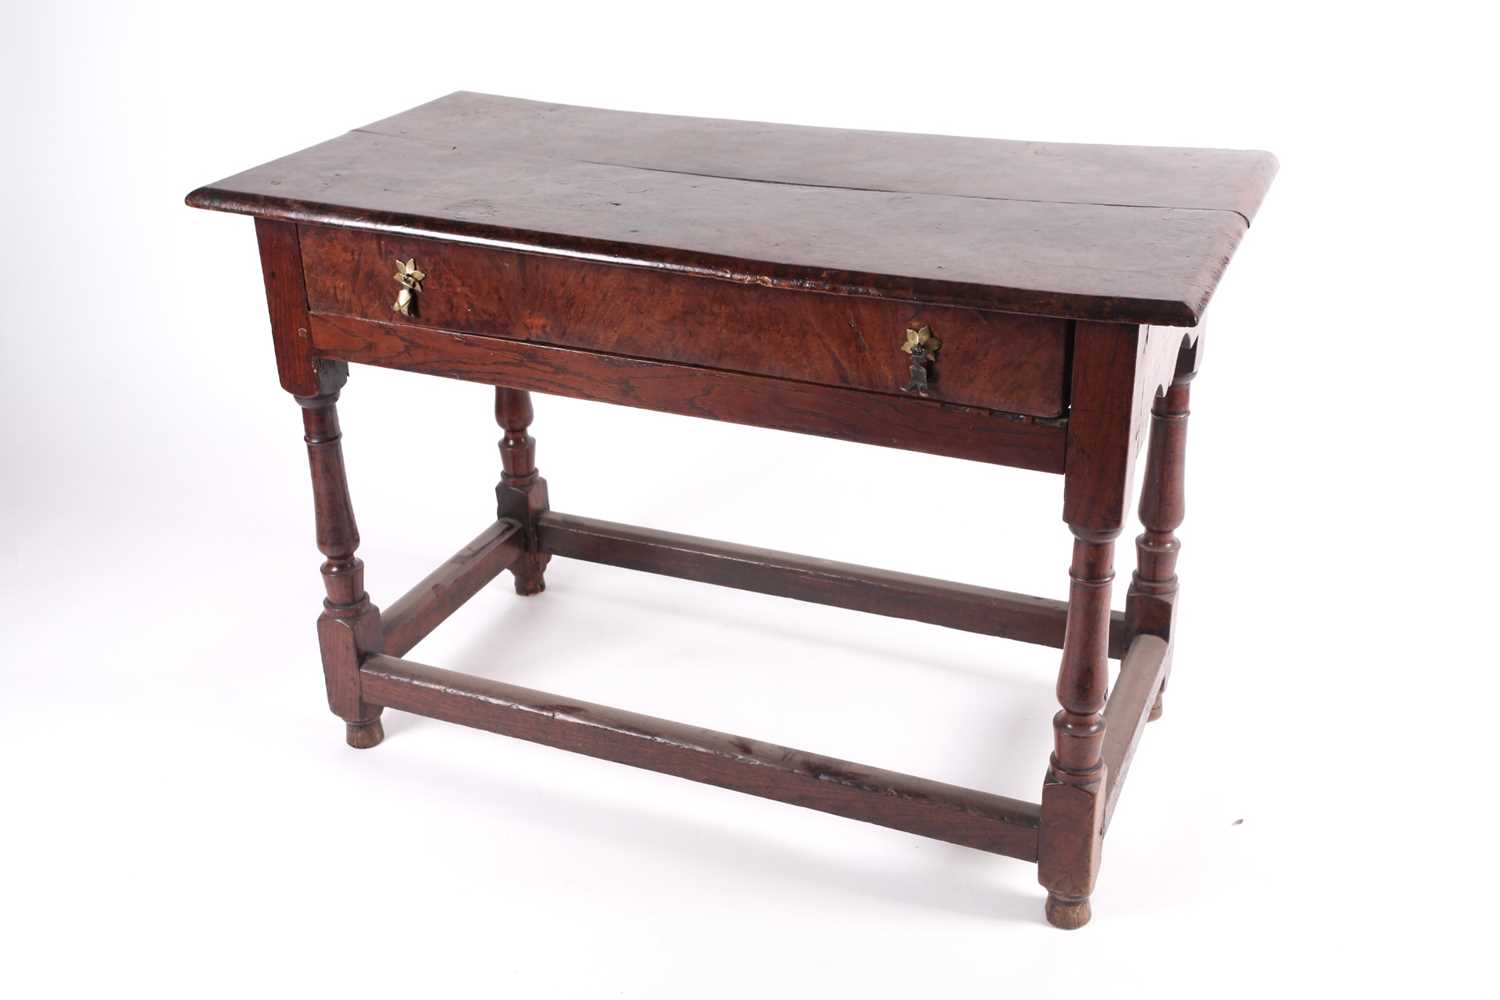 An unusual late 17th-century burr elm and oak single drawer rectangular side table, the top and